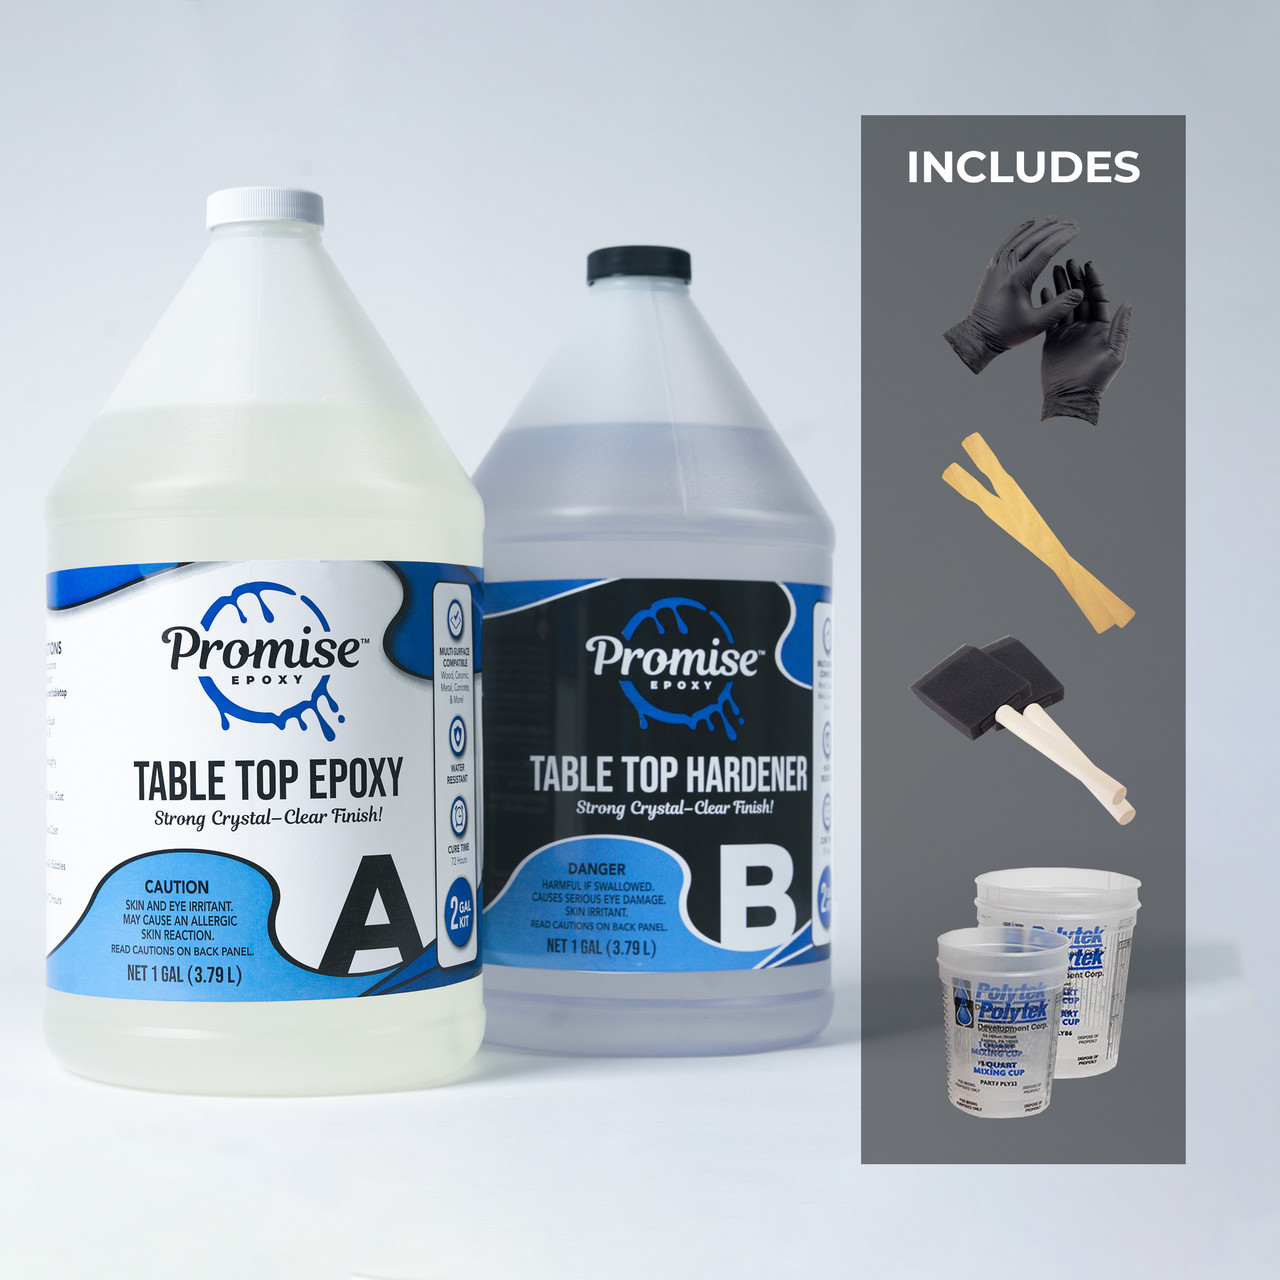 Promise Epoxy - 2 Gallon Kit of UV Art Formula Crystal Clear Coating Table Top Epoxy Resin with Superior UV Resistant Hard Finish on Tabletop, Counter